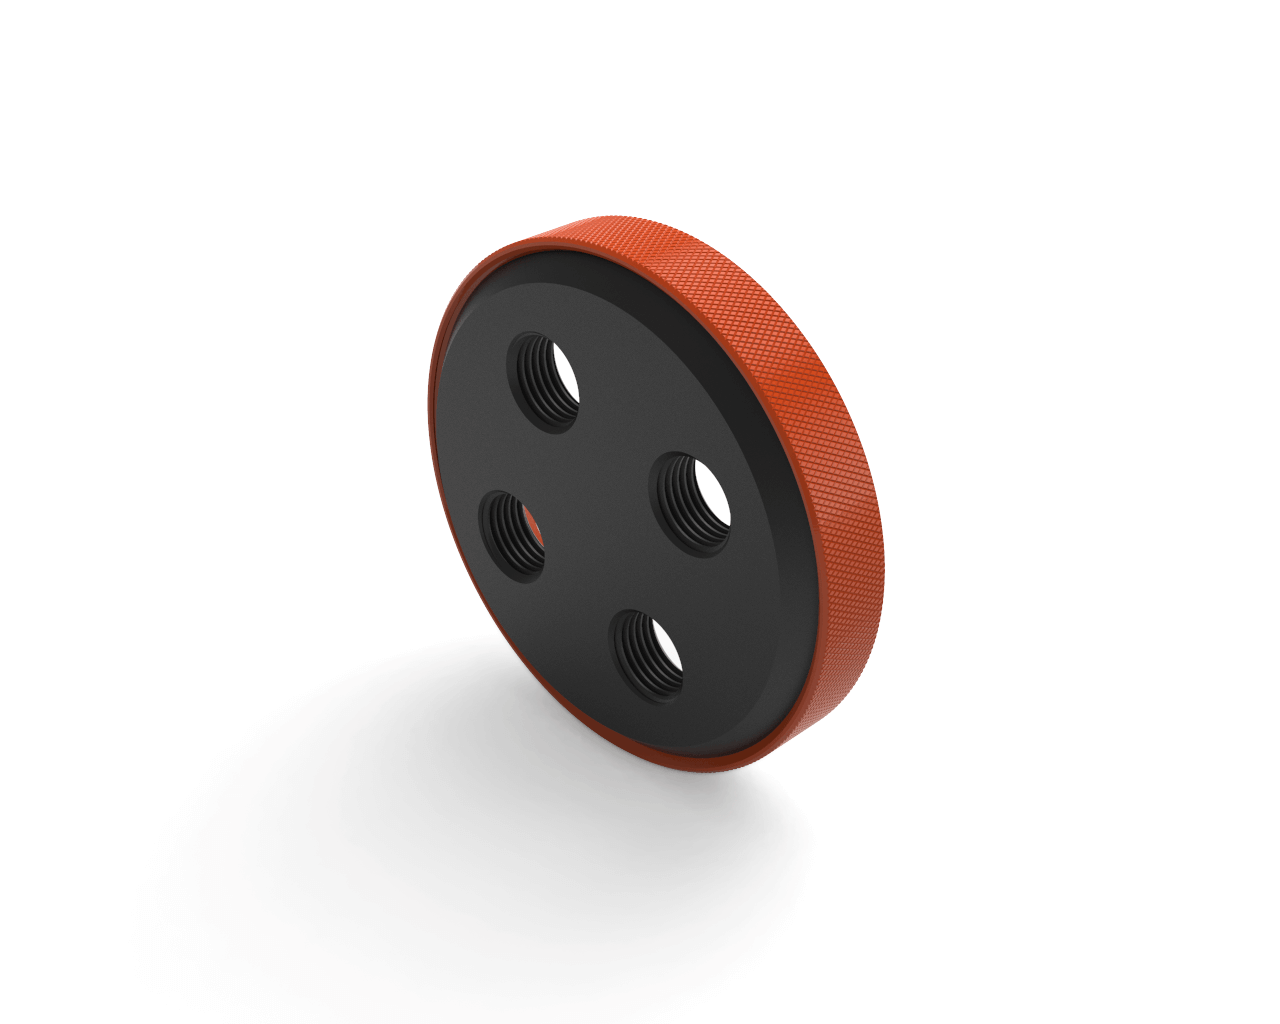 PrimoChill CTR Replacement SX Compression Ring - PrimoChill - KEEPING IT COOL Orange